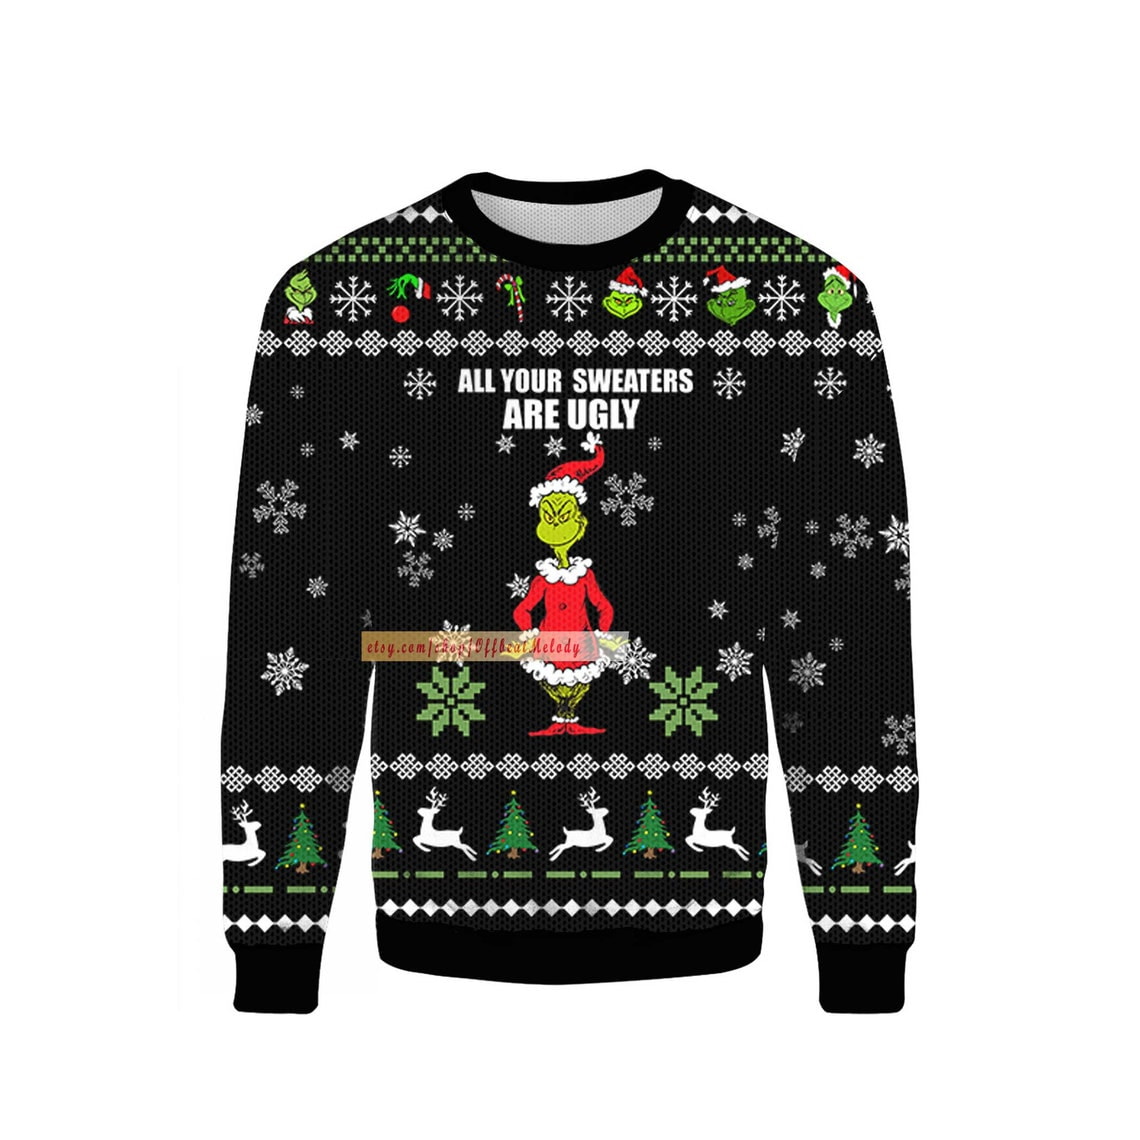 All Your Sweaters Are Ugly Christmas Sweater